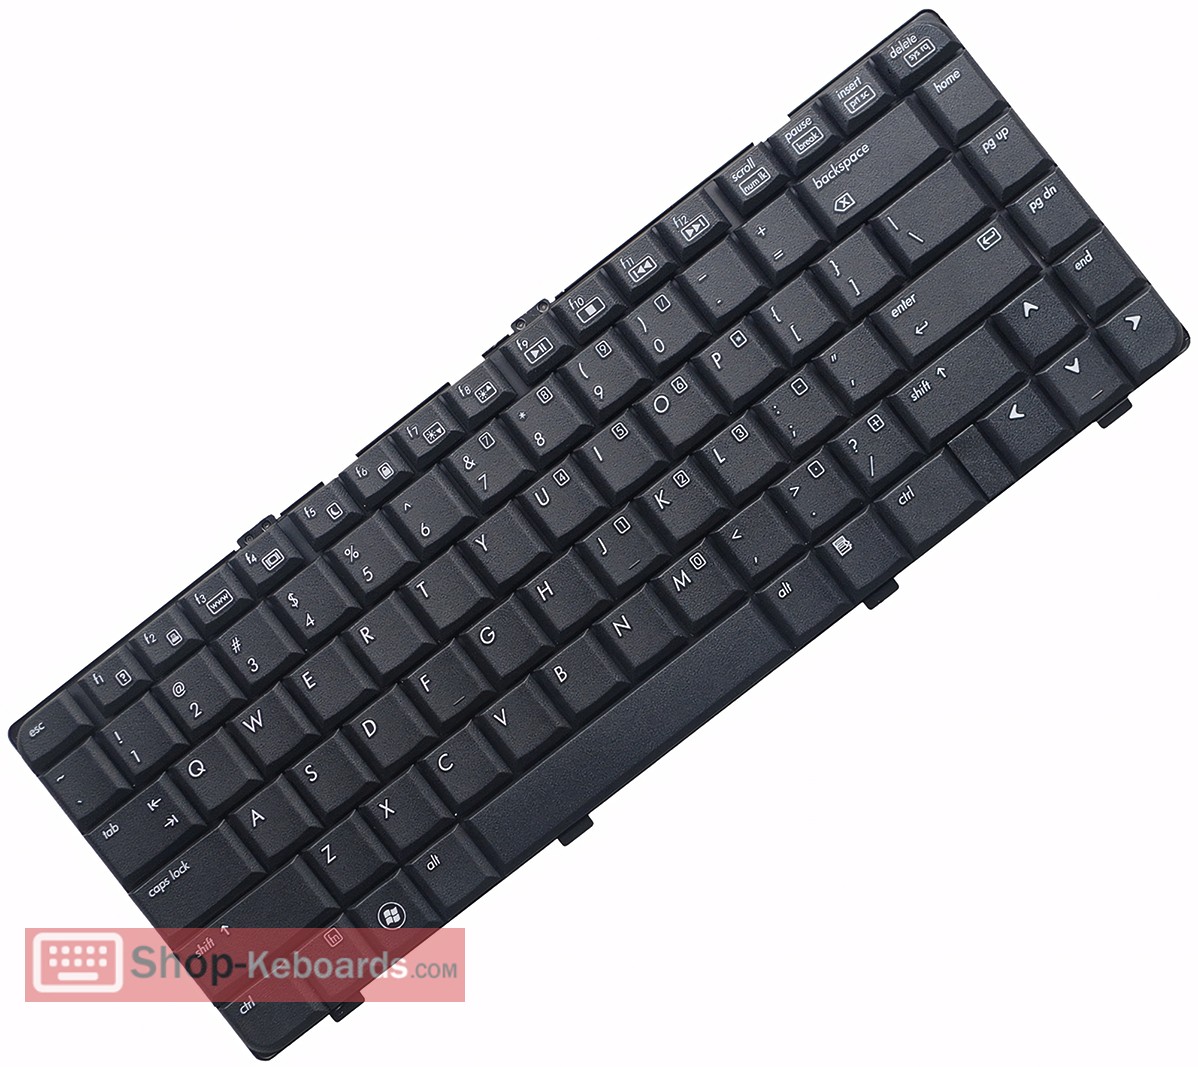 HP Pavilion dv6612eo  Keyboard replacement